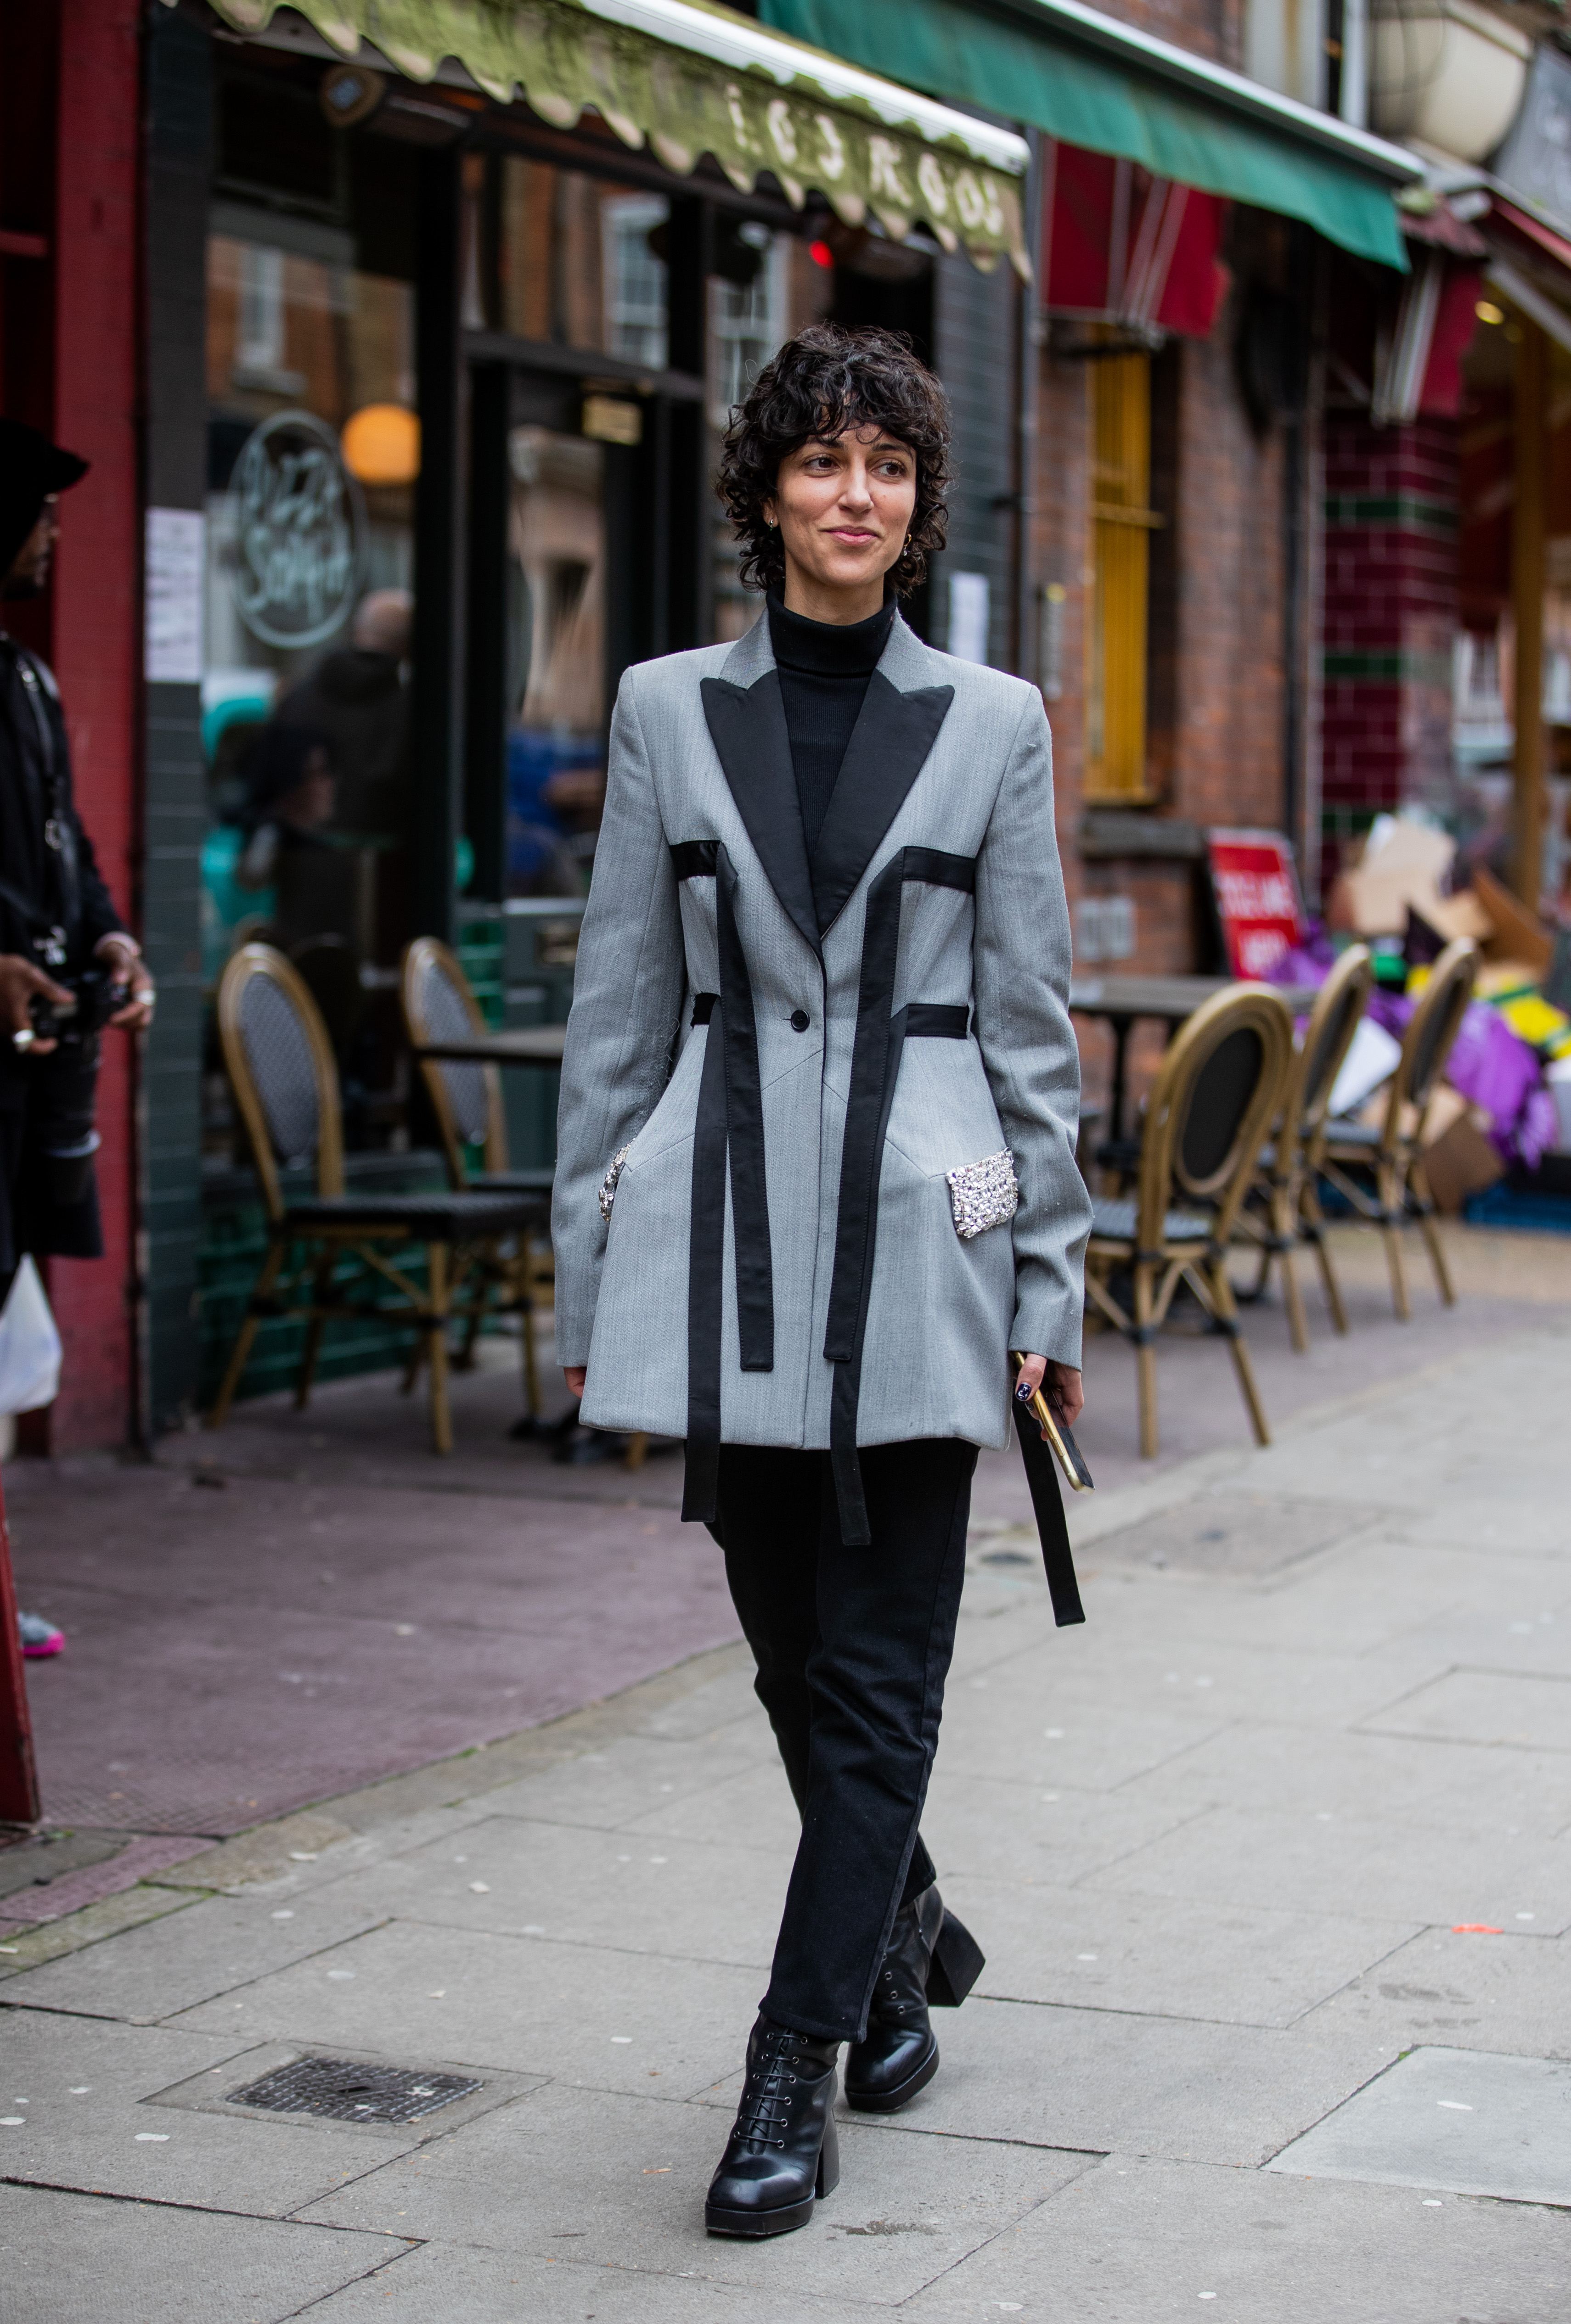 Yasmin Sewell is seen during London Fashion Week February 2020 on February 17, 2020, in London, England. | Source: Getty Images